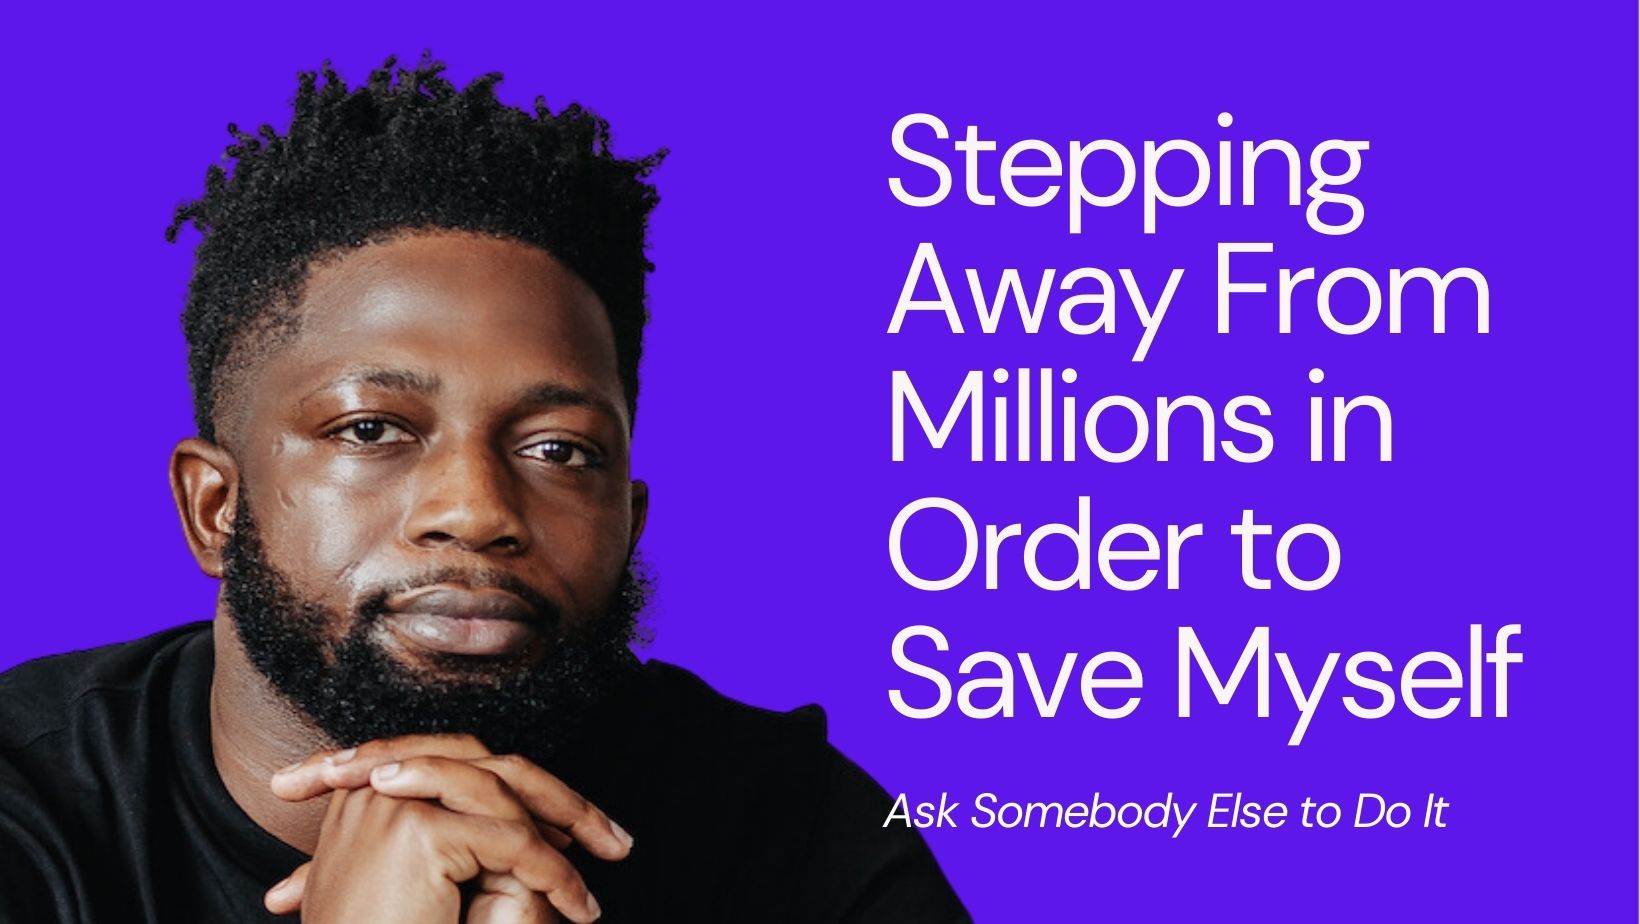 Ask Somebody Else to Do It, Please. Stepping Away From Millions in Order to Save Myself